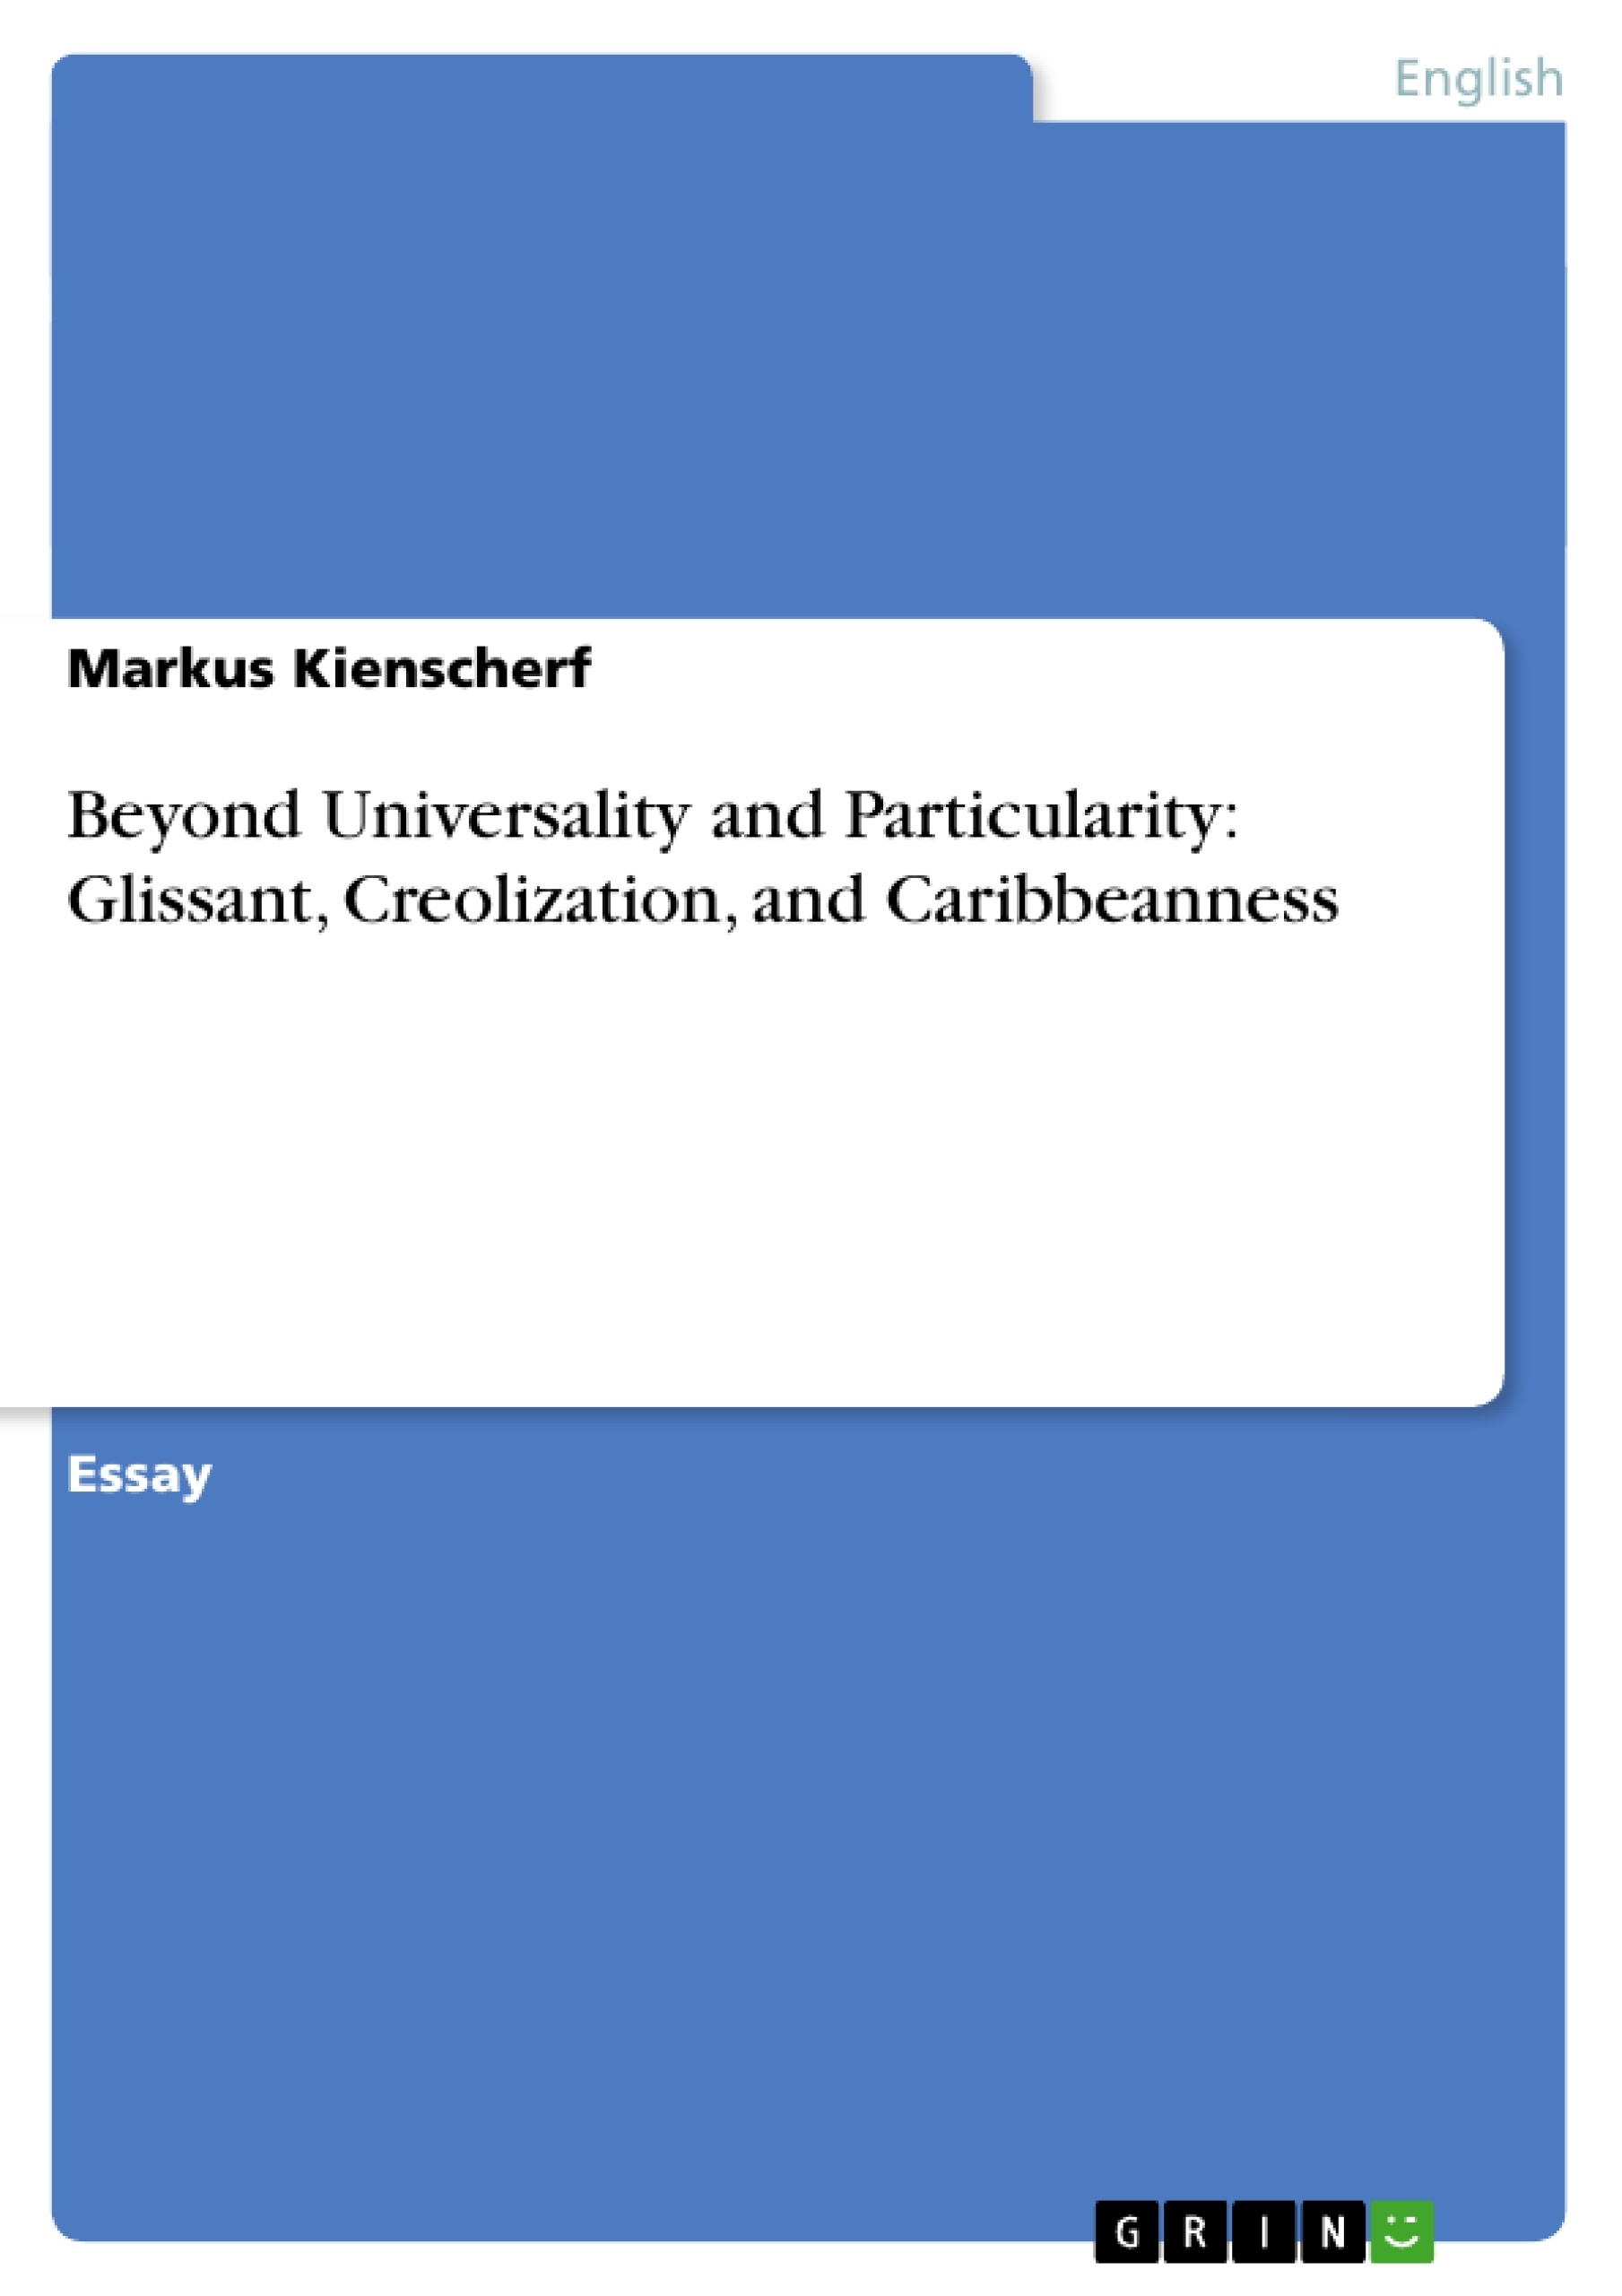 Título: Beyond Universality and Particularity: Glissant, Creolization, and Caribbeanness